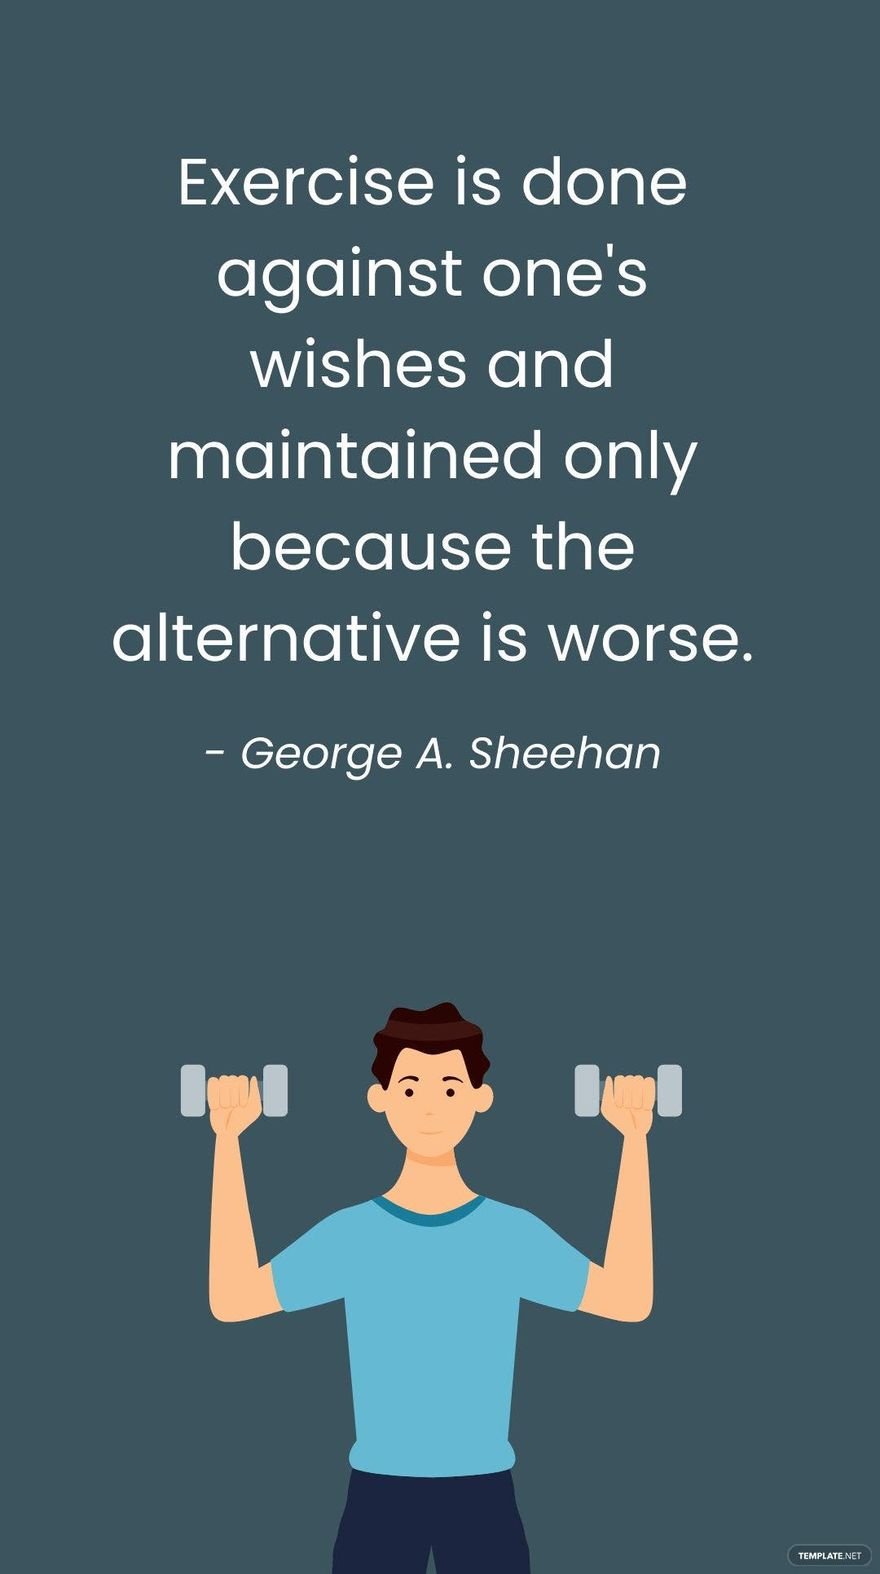 George A. Sheehan - Exercise is done against one's wishes and maintained only because the alternative is worse.